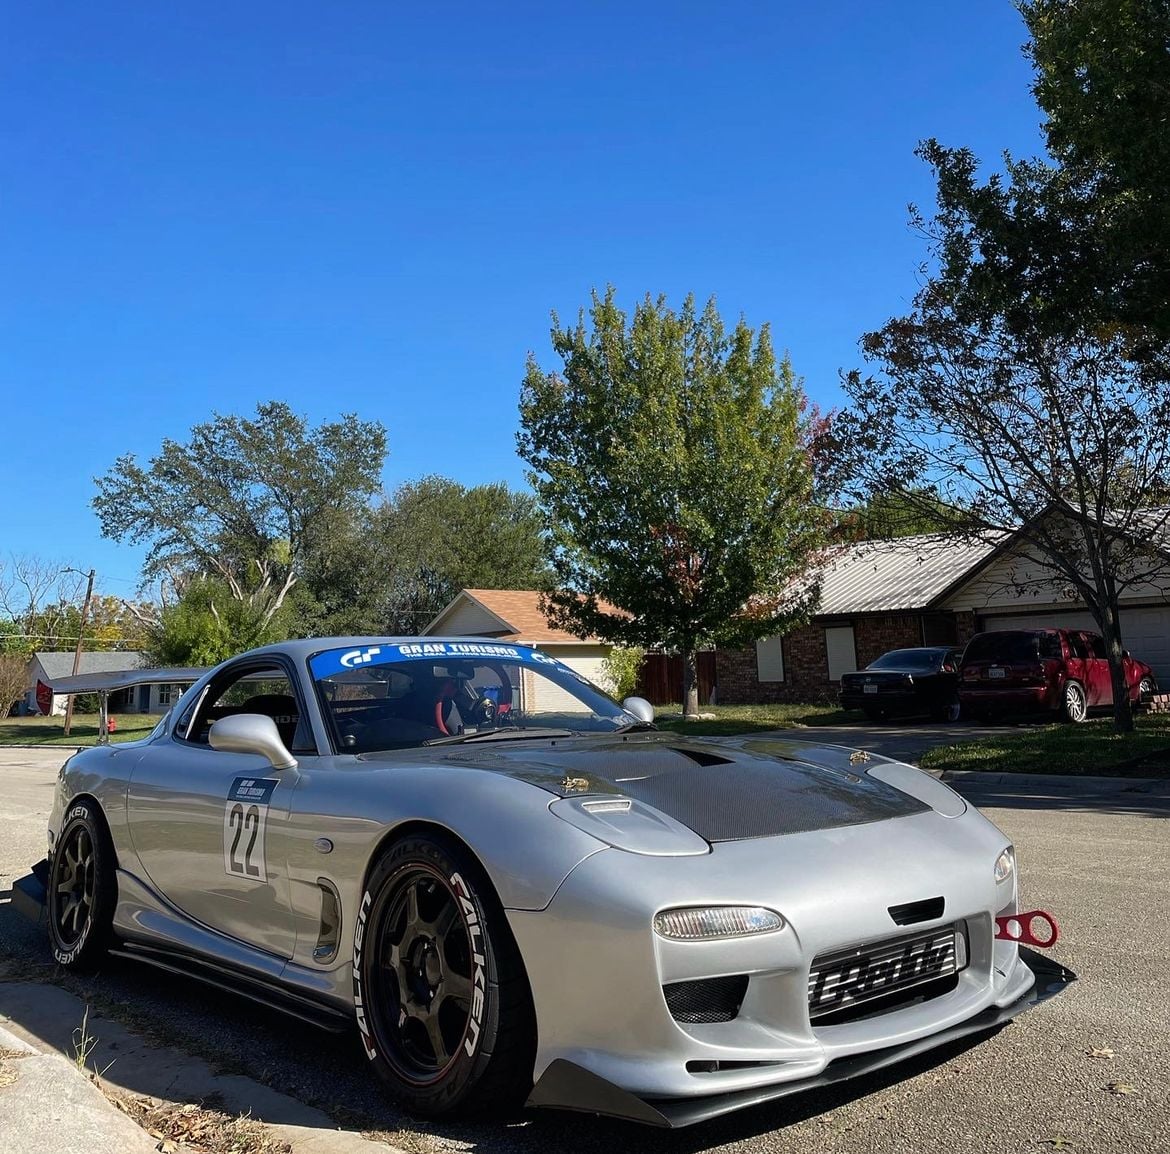 Exterior Body Parts - FD3s Body Kit - New or Used - 1993 to 1994 Mazda RX-7 - Copperas Cove, TX 76522, United States